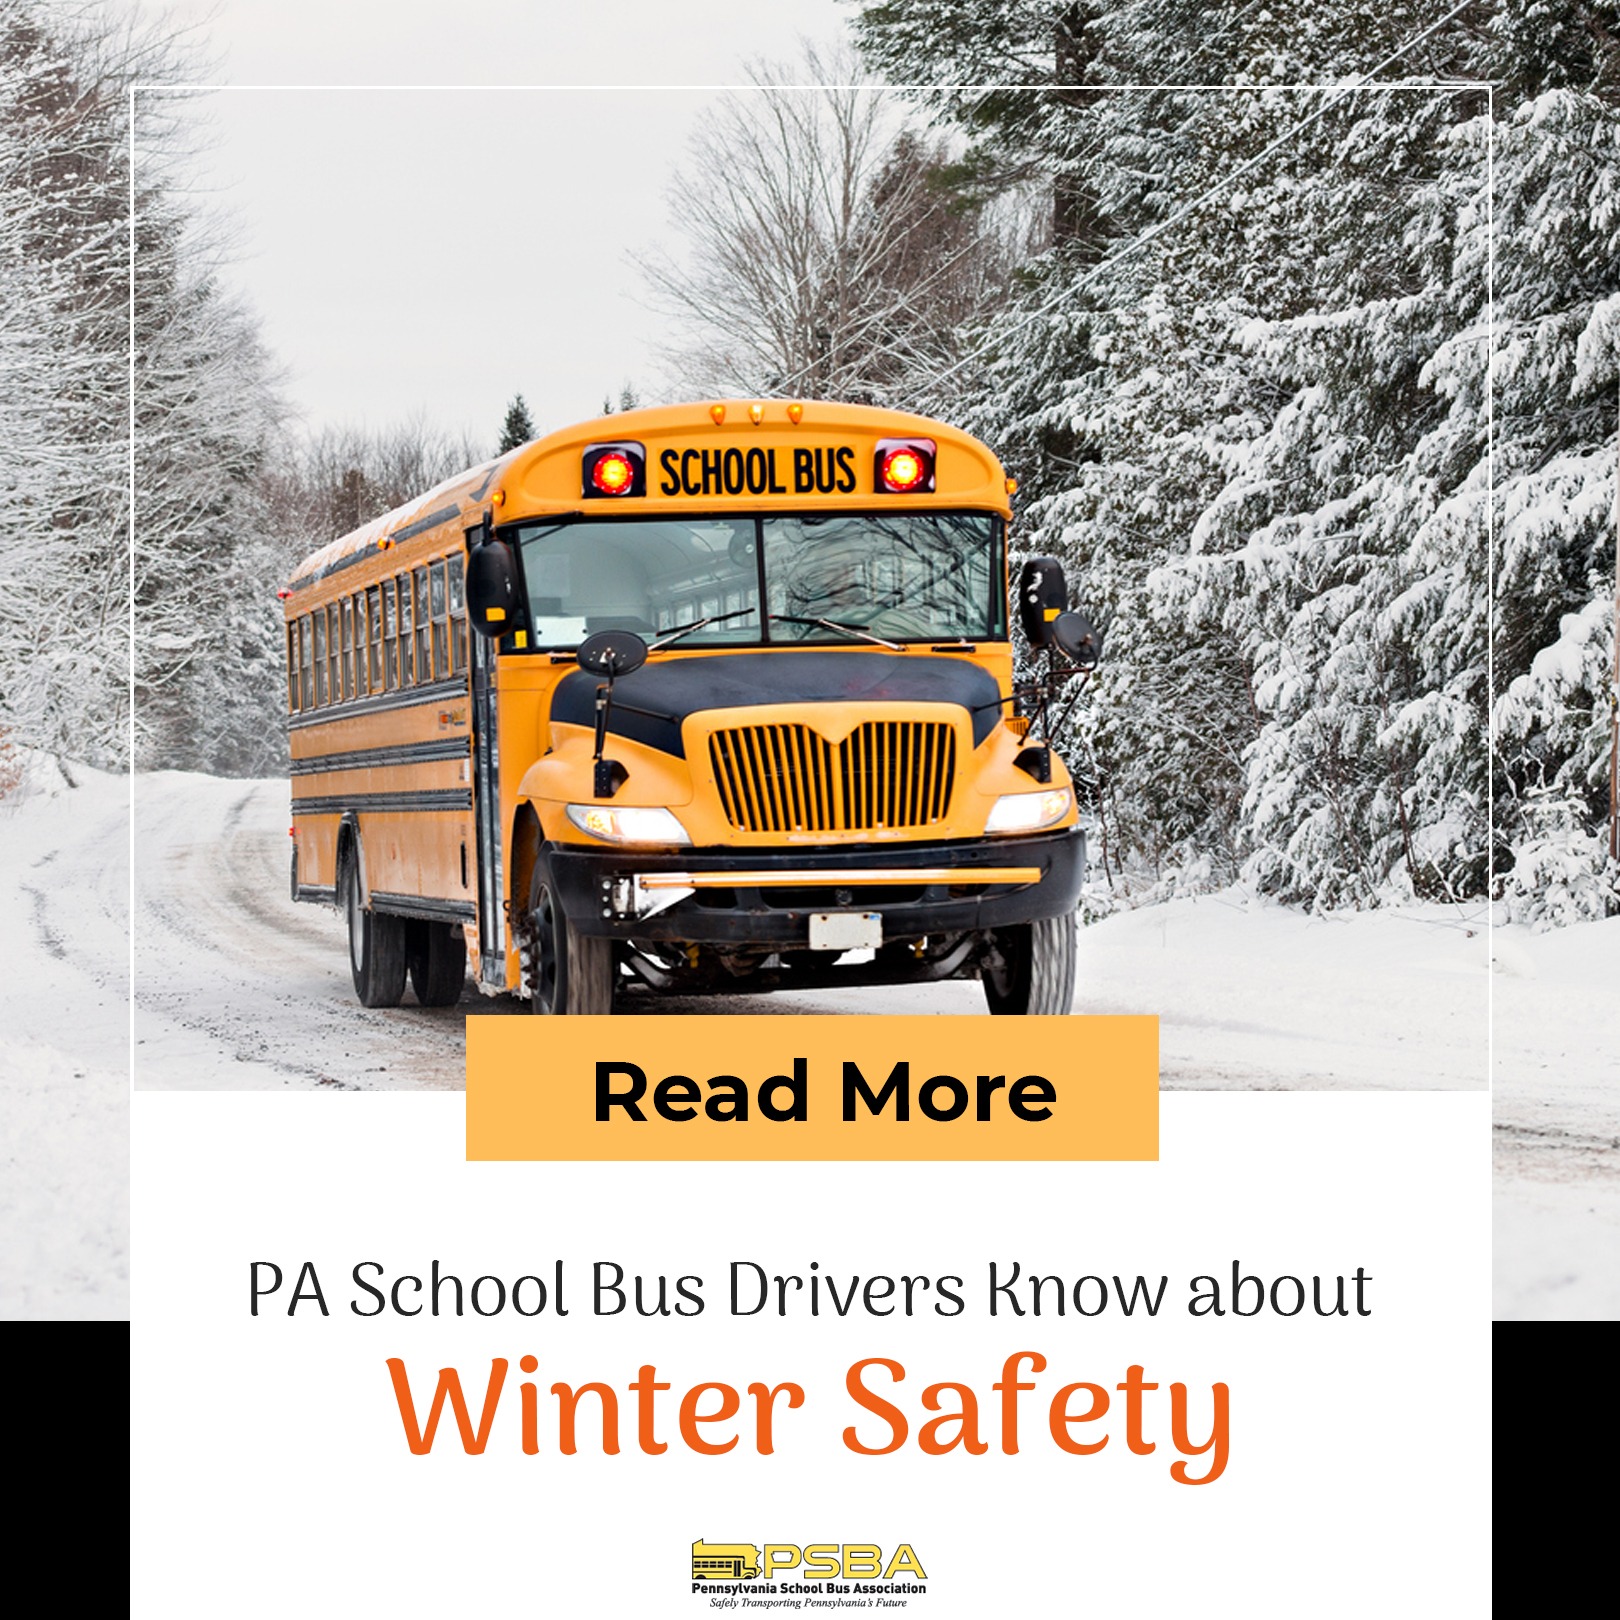 PA School Bus Drivers Know about Winter Safety